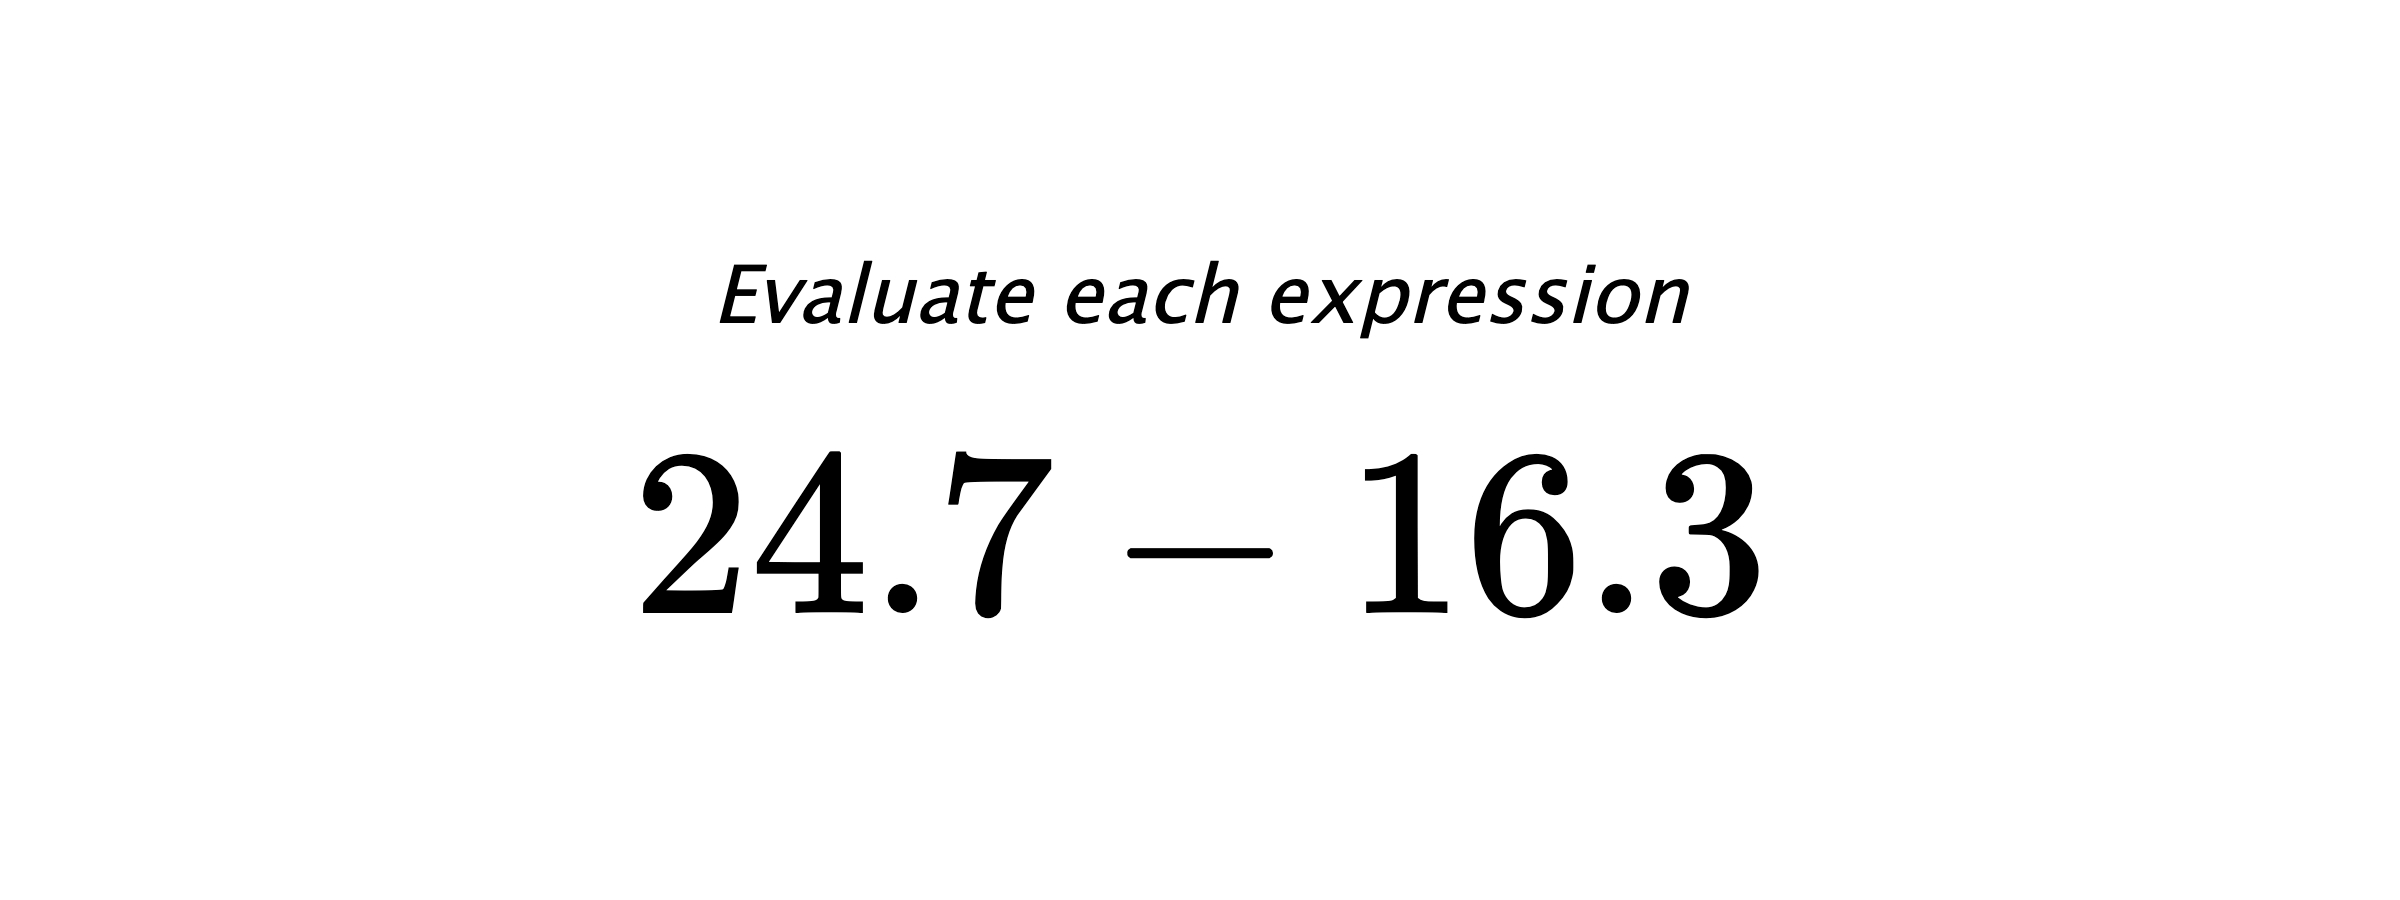 Evaluate each expression $ 24.7-16.3 $